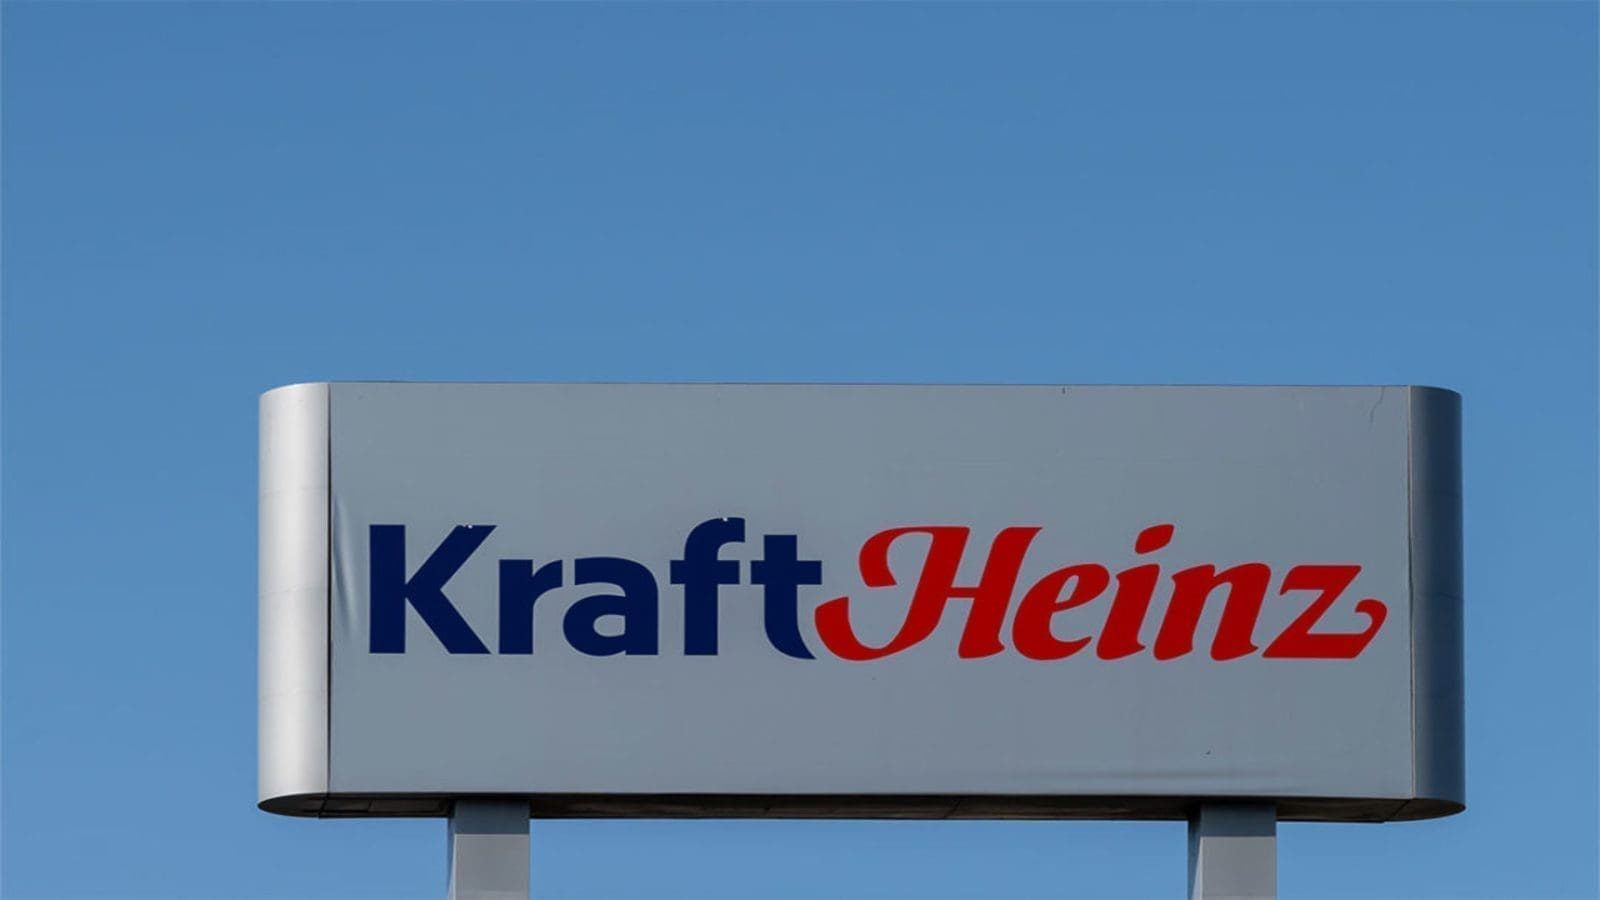 Kraft Heinz invests US$400m in building automated consumer packaged goods distribution center in Illinois